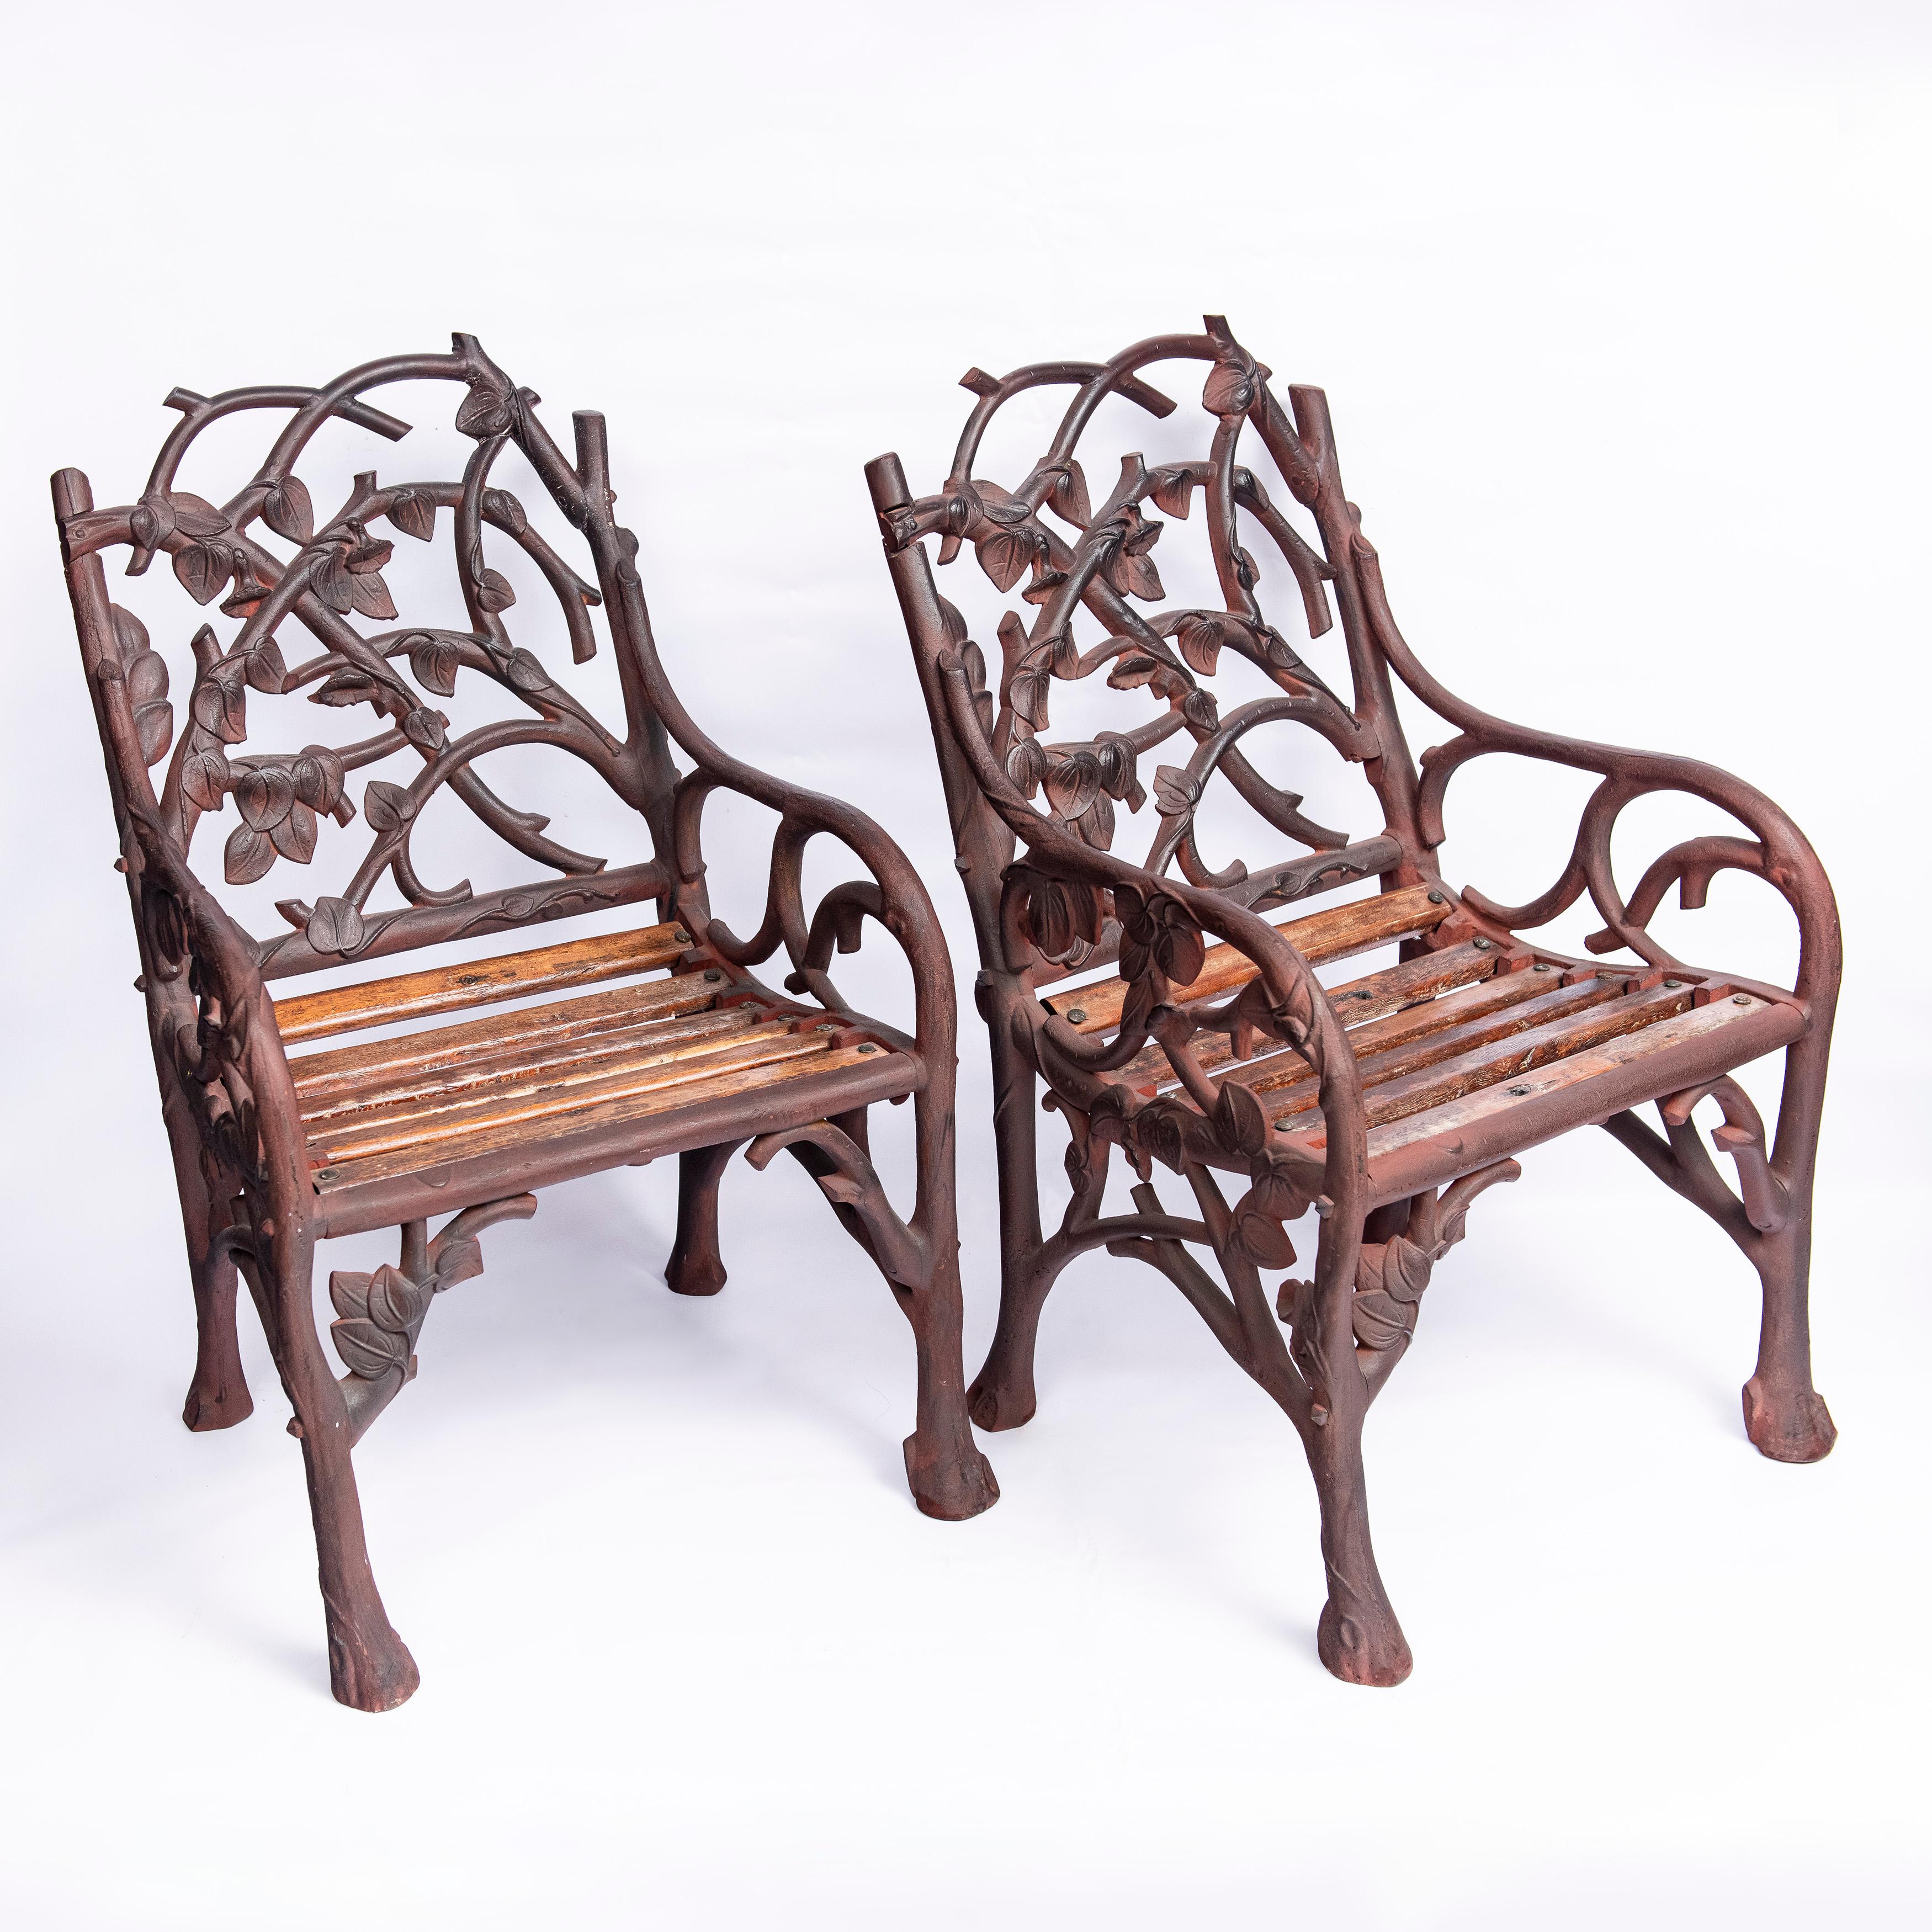 Cast Iron and Wood Garden Furniture Set, England, Late 19th Century For Sale 1